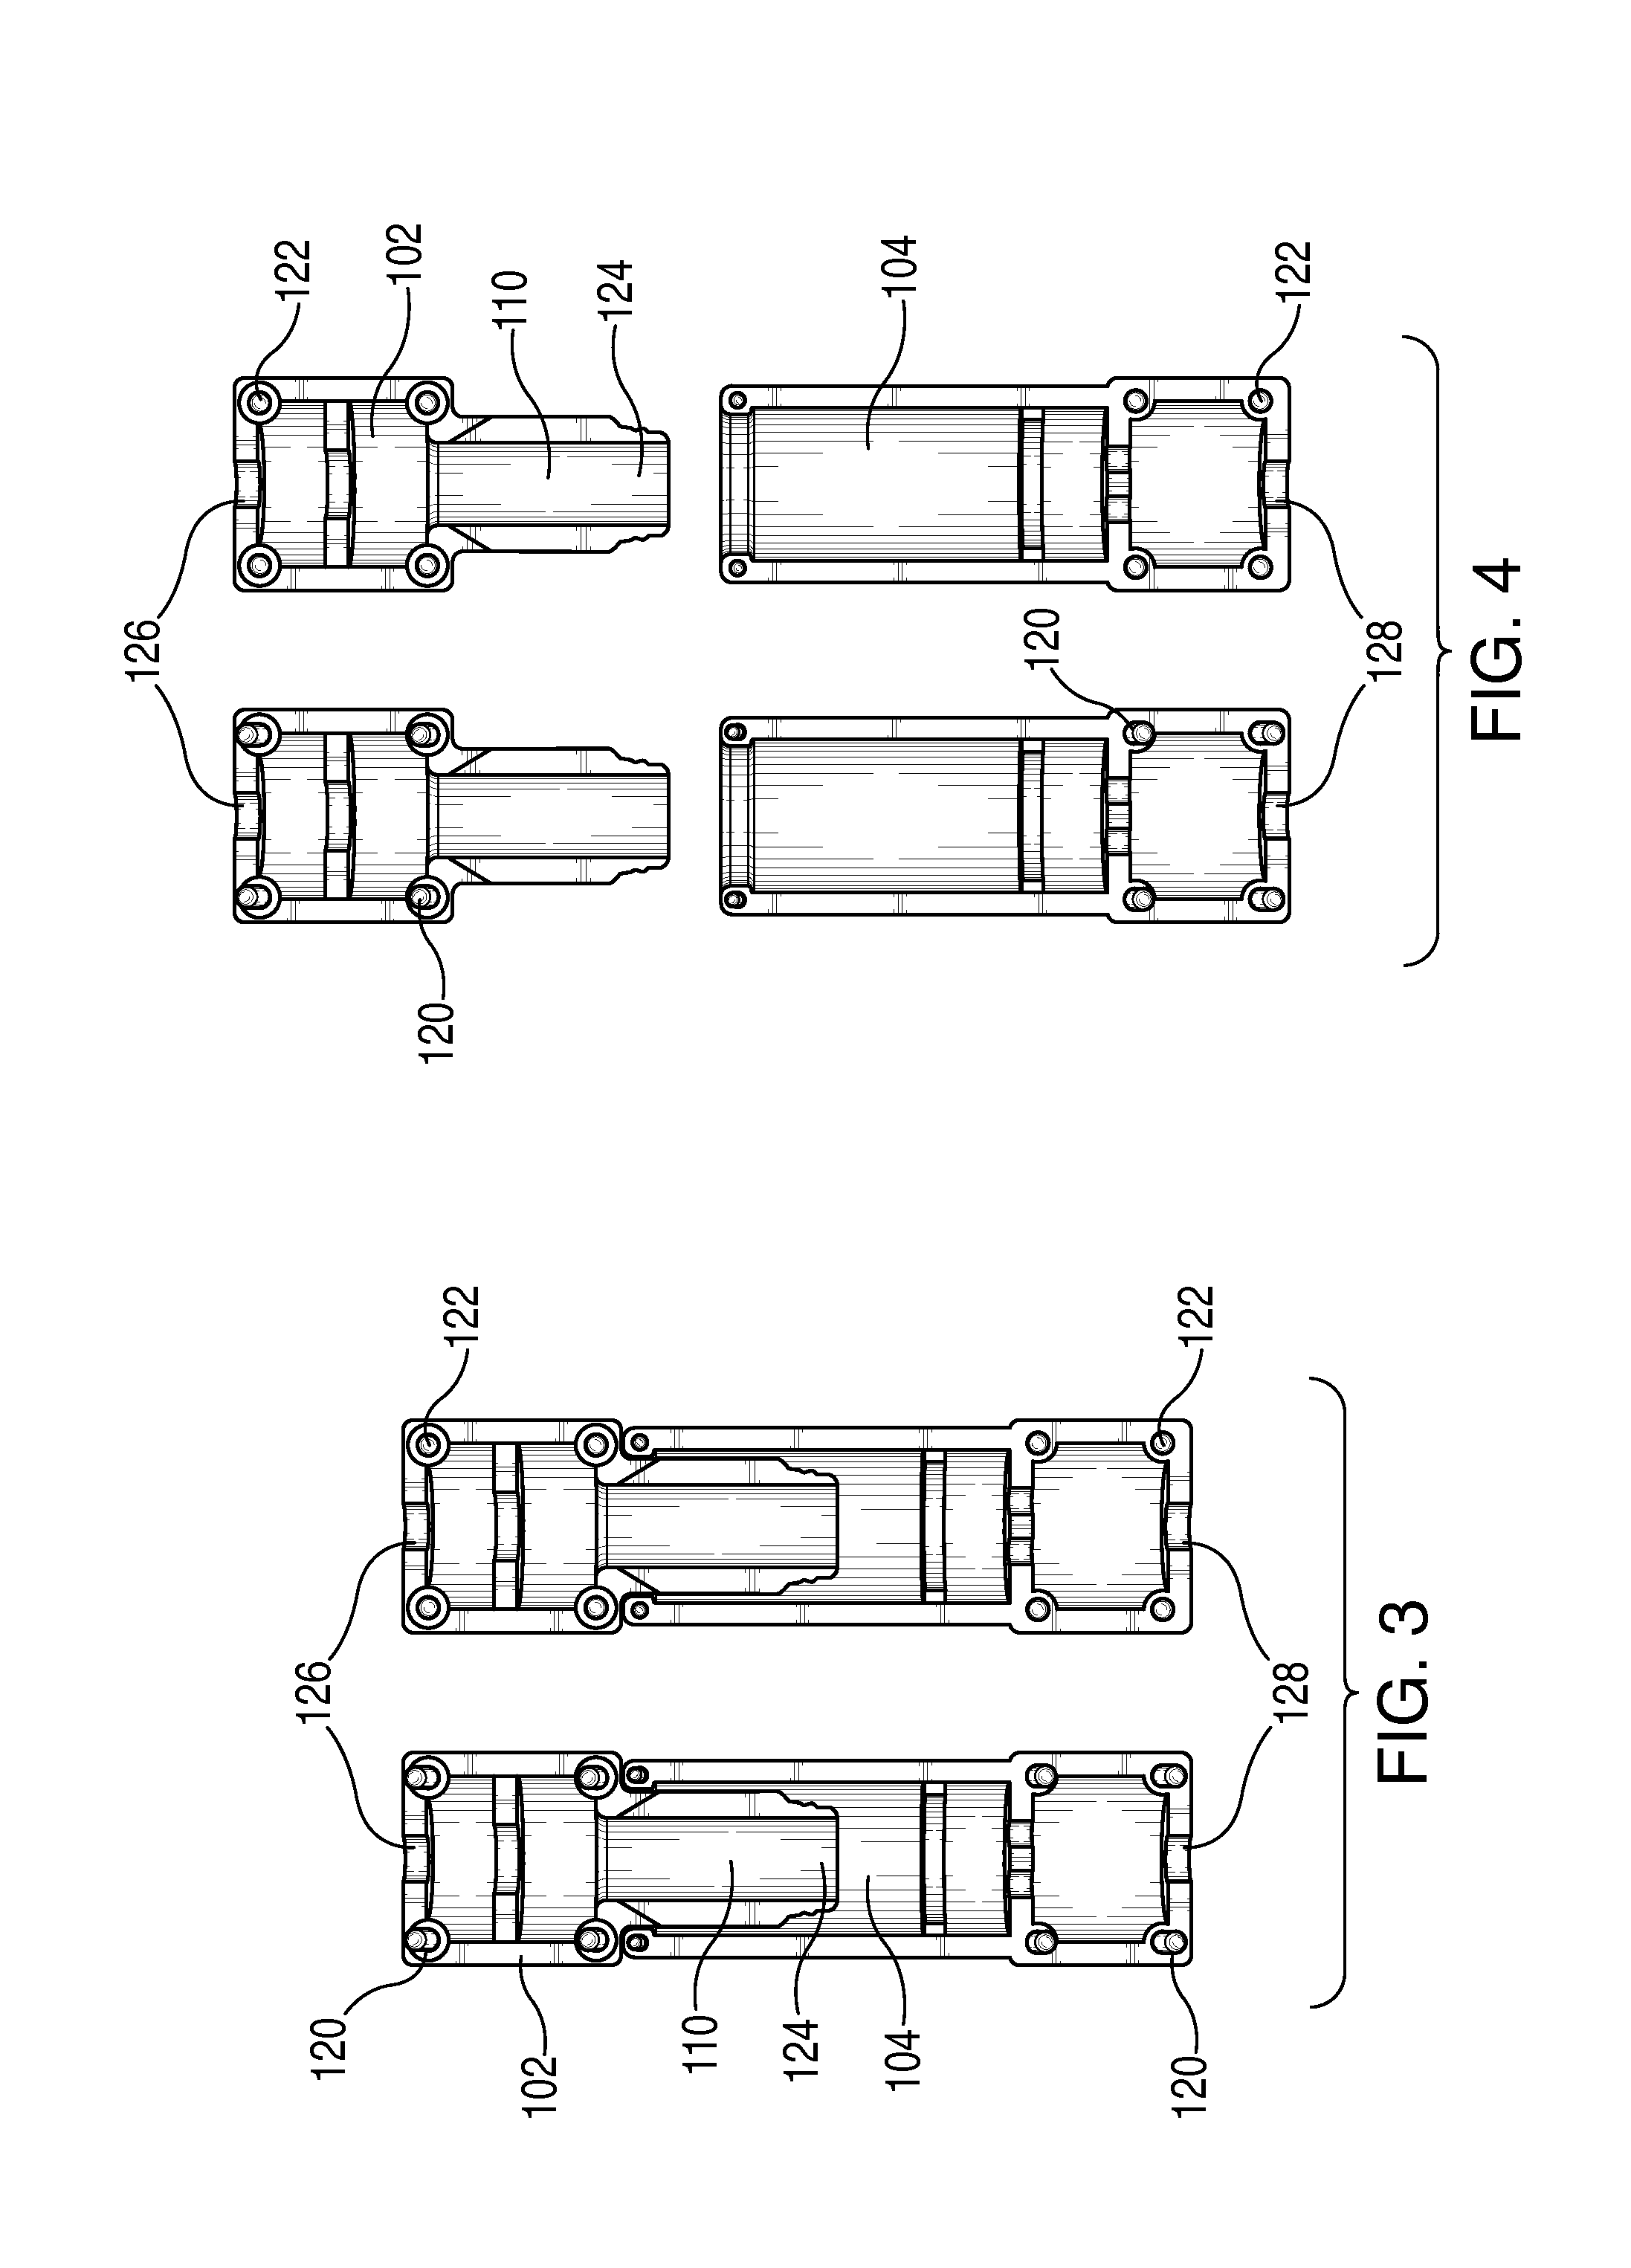 Radially uniform spring-biased intra-pole plug connector and transformer outside the trunk configuration for electric artificial tree